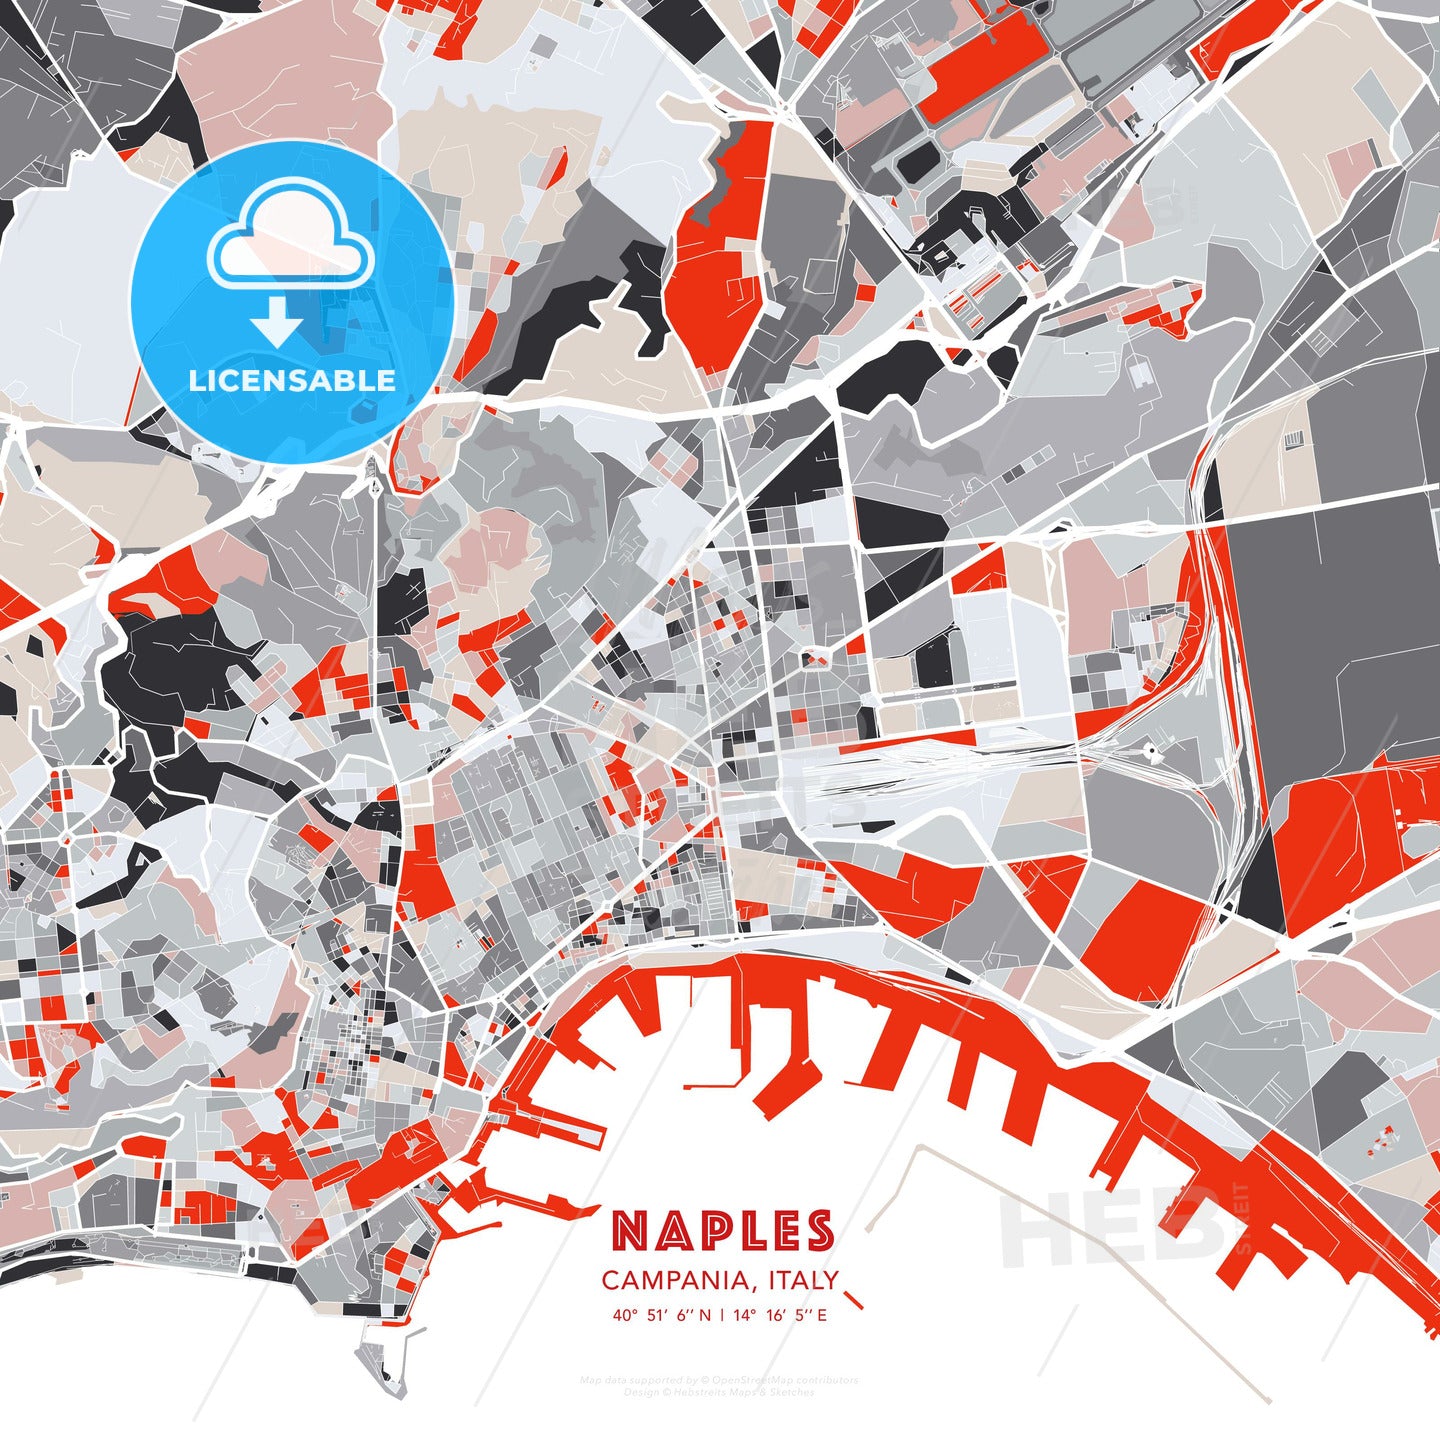 Naples, Campania, Italy, modern map - HEBSTREITS Sketches